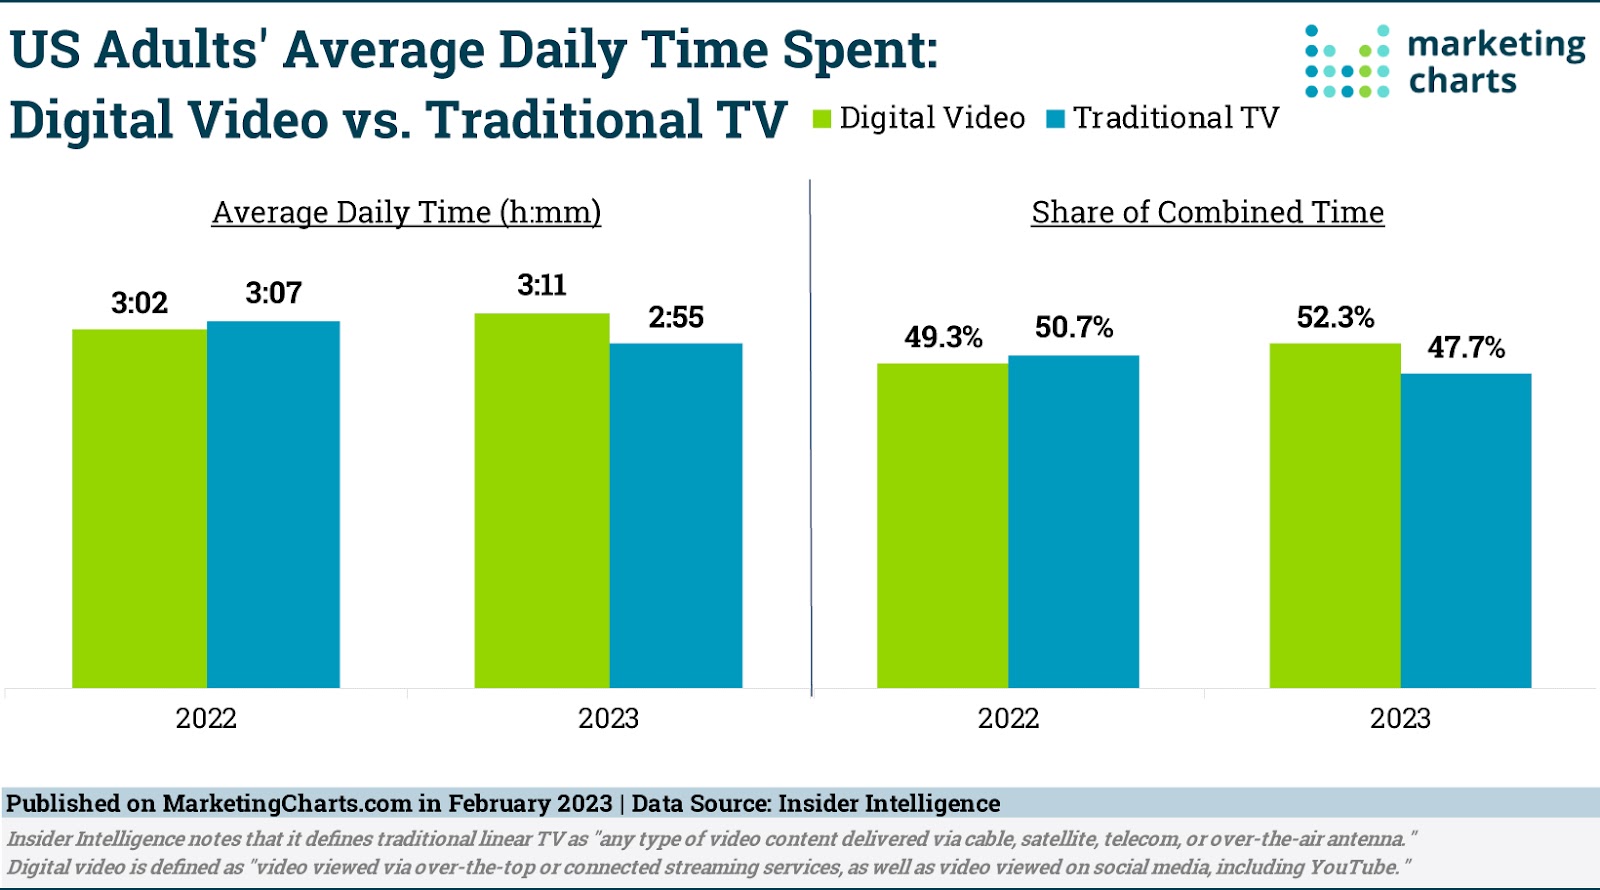 Marketing Charts's data showing US' adults average daily spent for digital video vs traditional TV